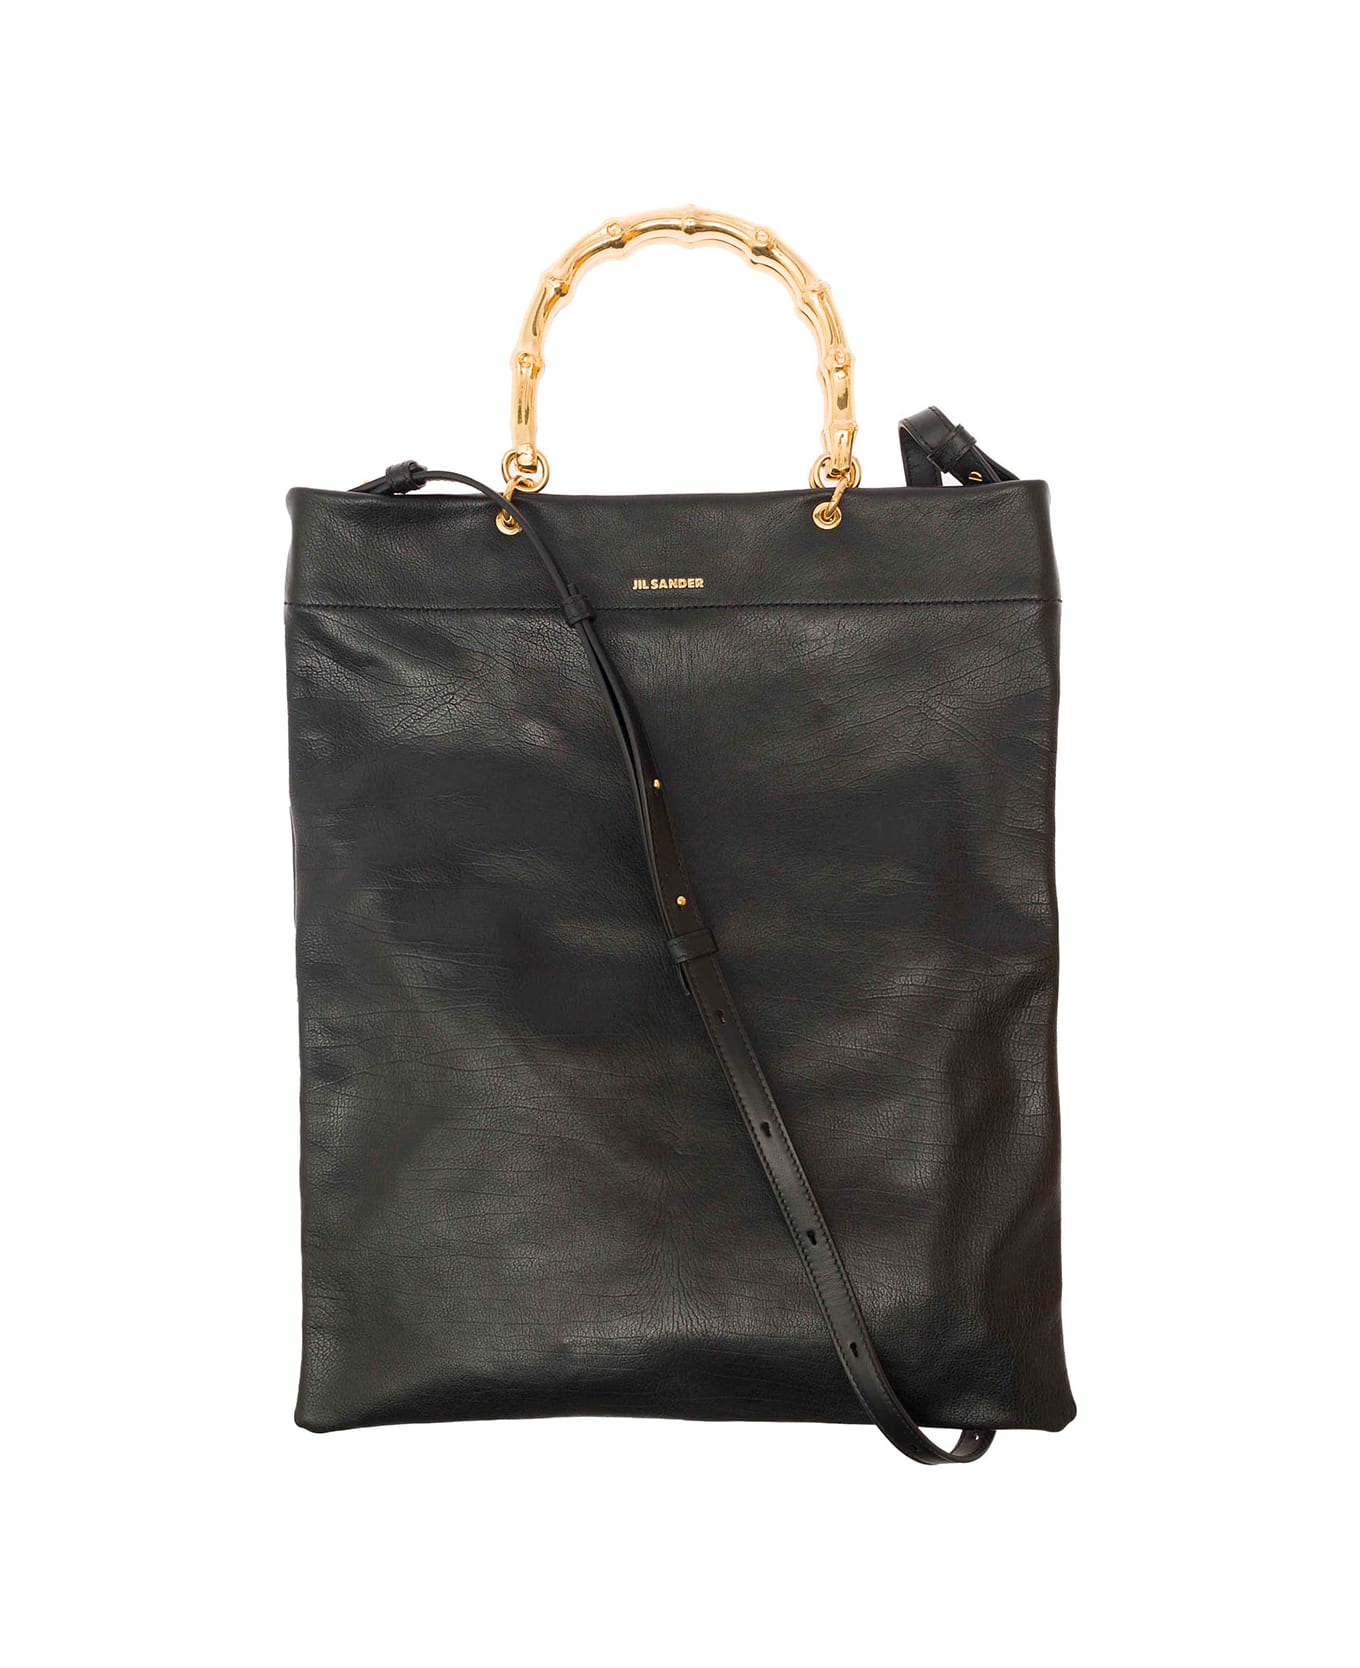 Jil Sander Black Tote Bag With Bamboo Handles In Leather Woman - Black